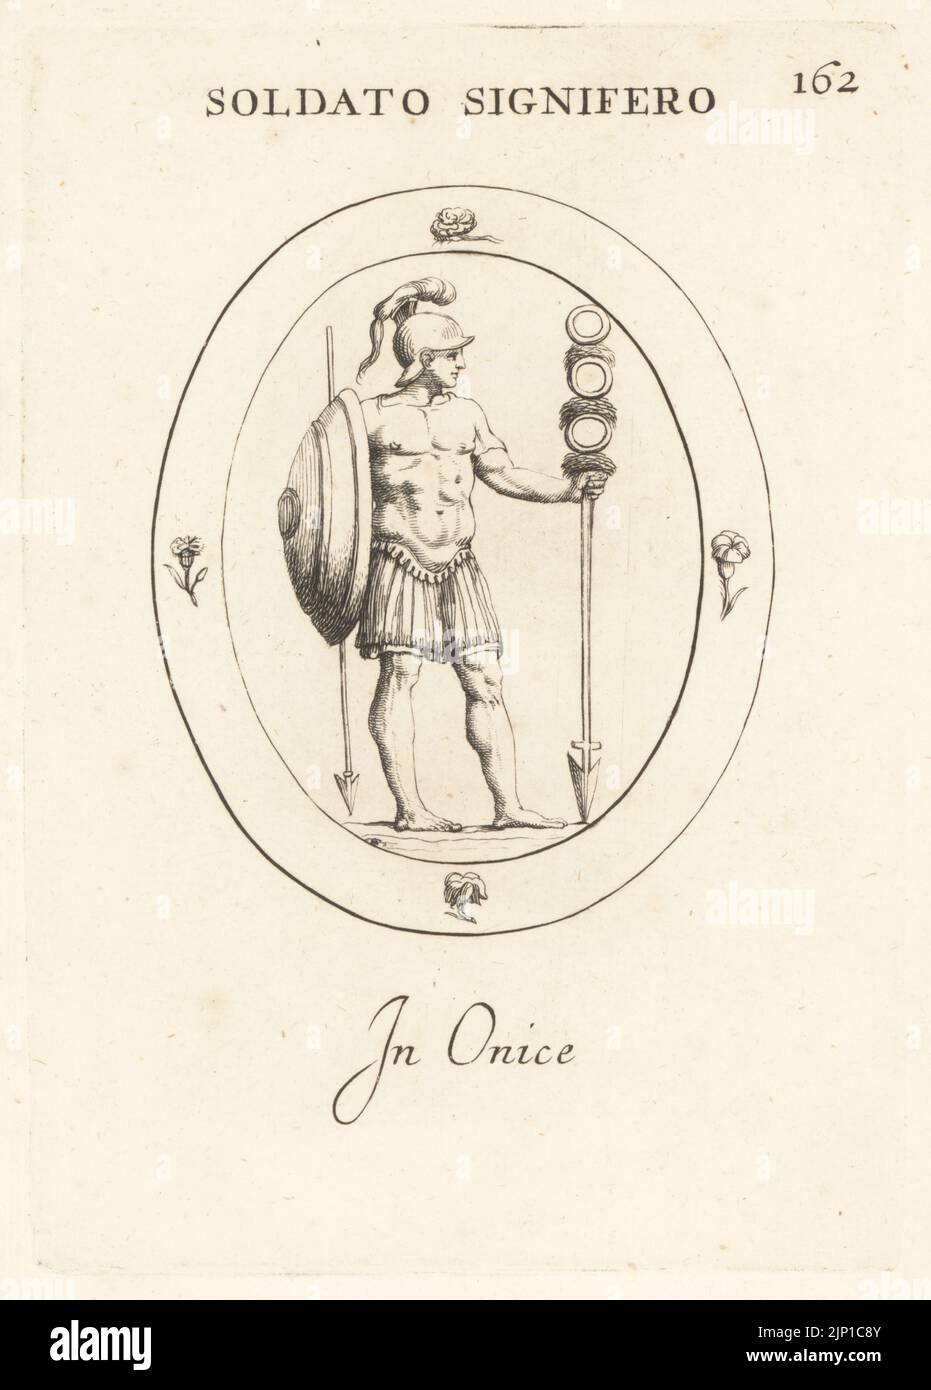 Roman standard bearer or signifer with the cohort's standard. Legoinary in crested helmet, breastplate, armour, shield or scutus, spear or hasta, standard or signum with its point in the ground. In onyx. Soldato Signifero. In onice. Copperplate engraving by Giovanni Battista Galestruzzi after Leonardo Agostini from Gemmae et Sculpturae Antiquae Depicti ab Leonardo Augustino Senesi, Abraham Blooteling, Amsterdam, 1685. Stock Photo